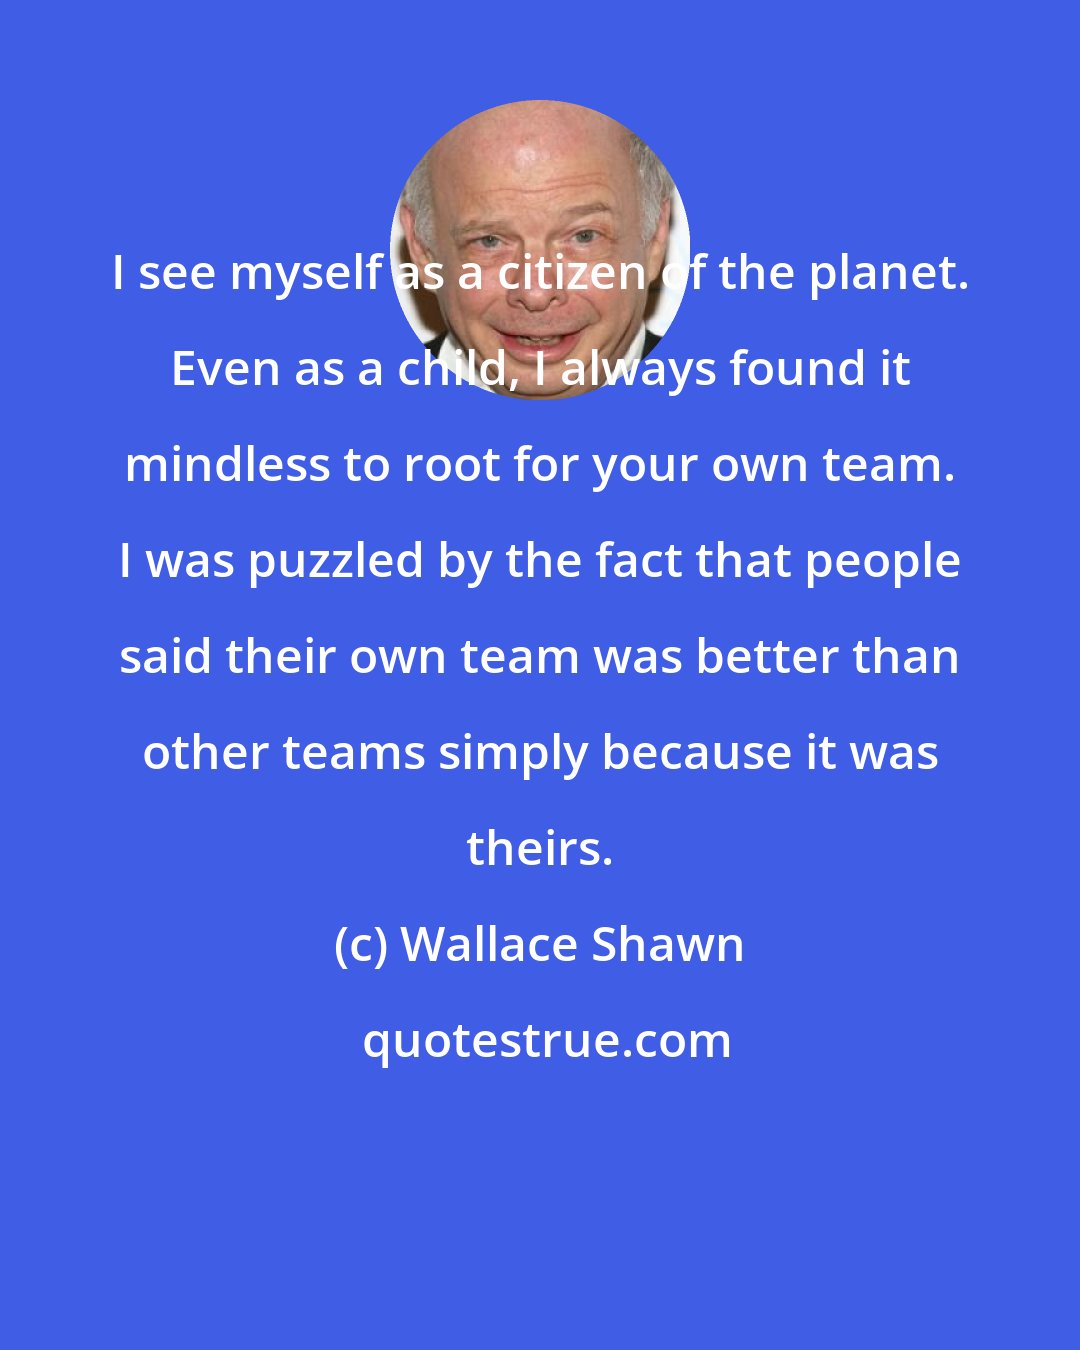 Wallace Shawn: I see myself as a citizen of the planet. Even as a child, I always found it mindless to root for your own team. I was puzzled by the fact that people said their own team was better than other teams simply because it was theirs.